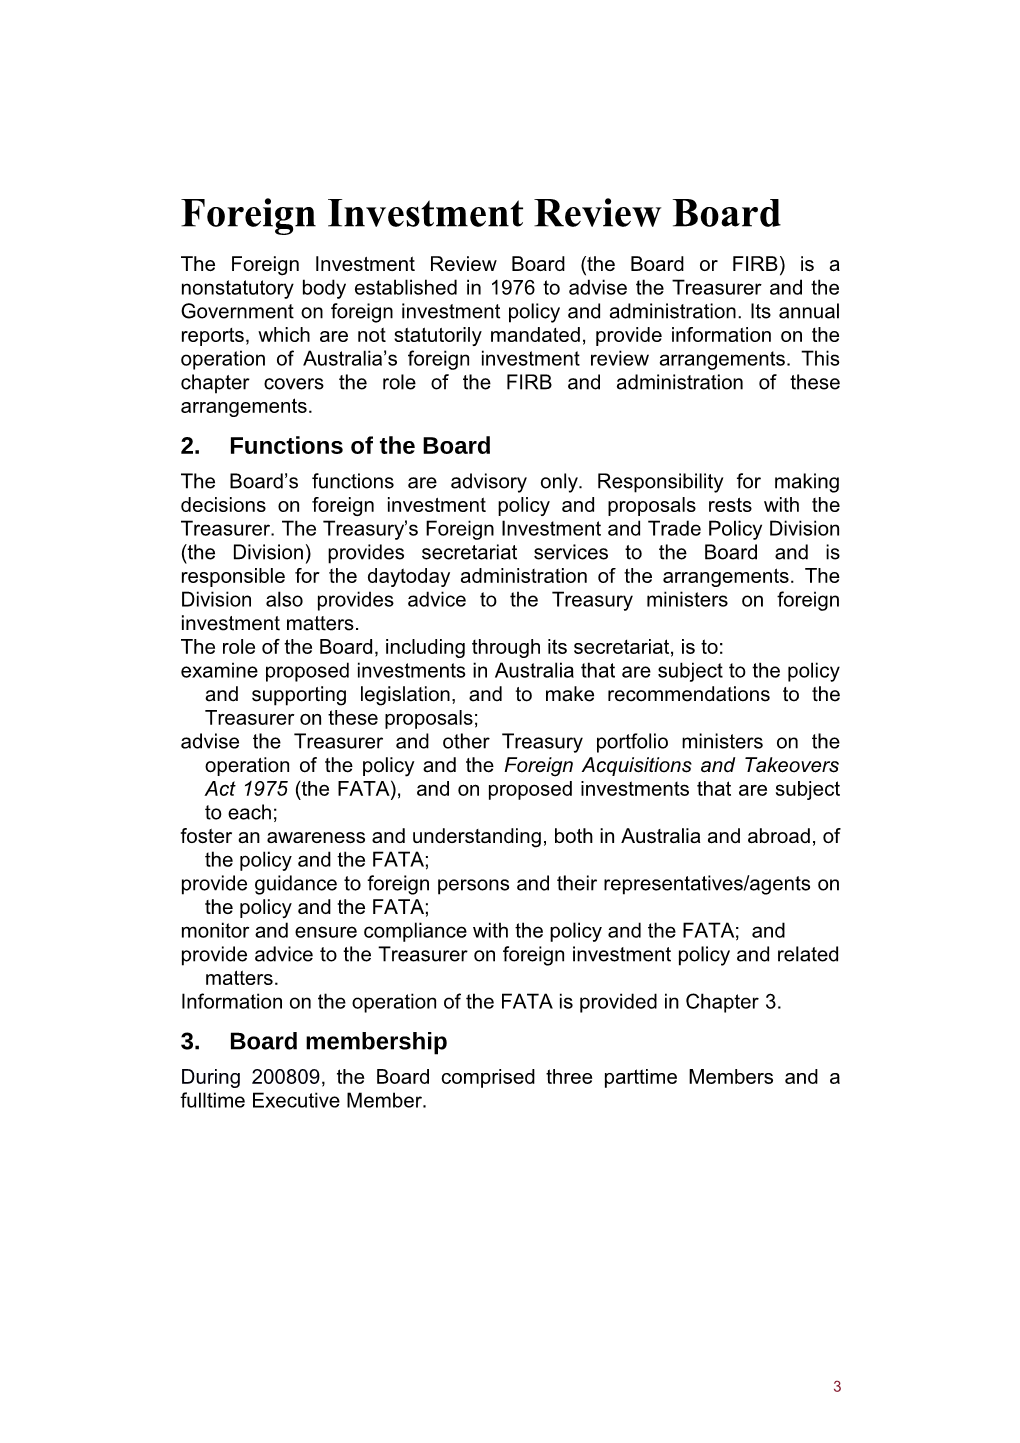 Chapter 1: Foreign Investment Review Board